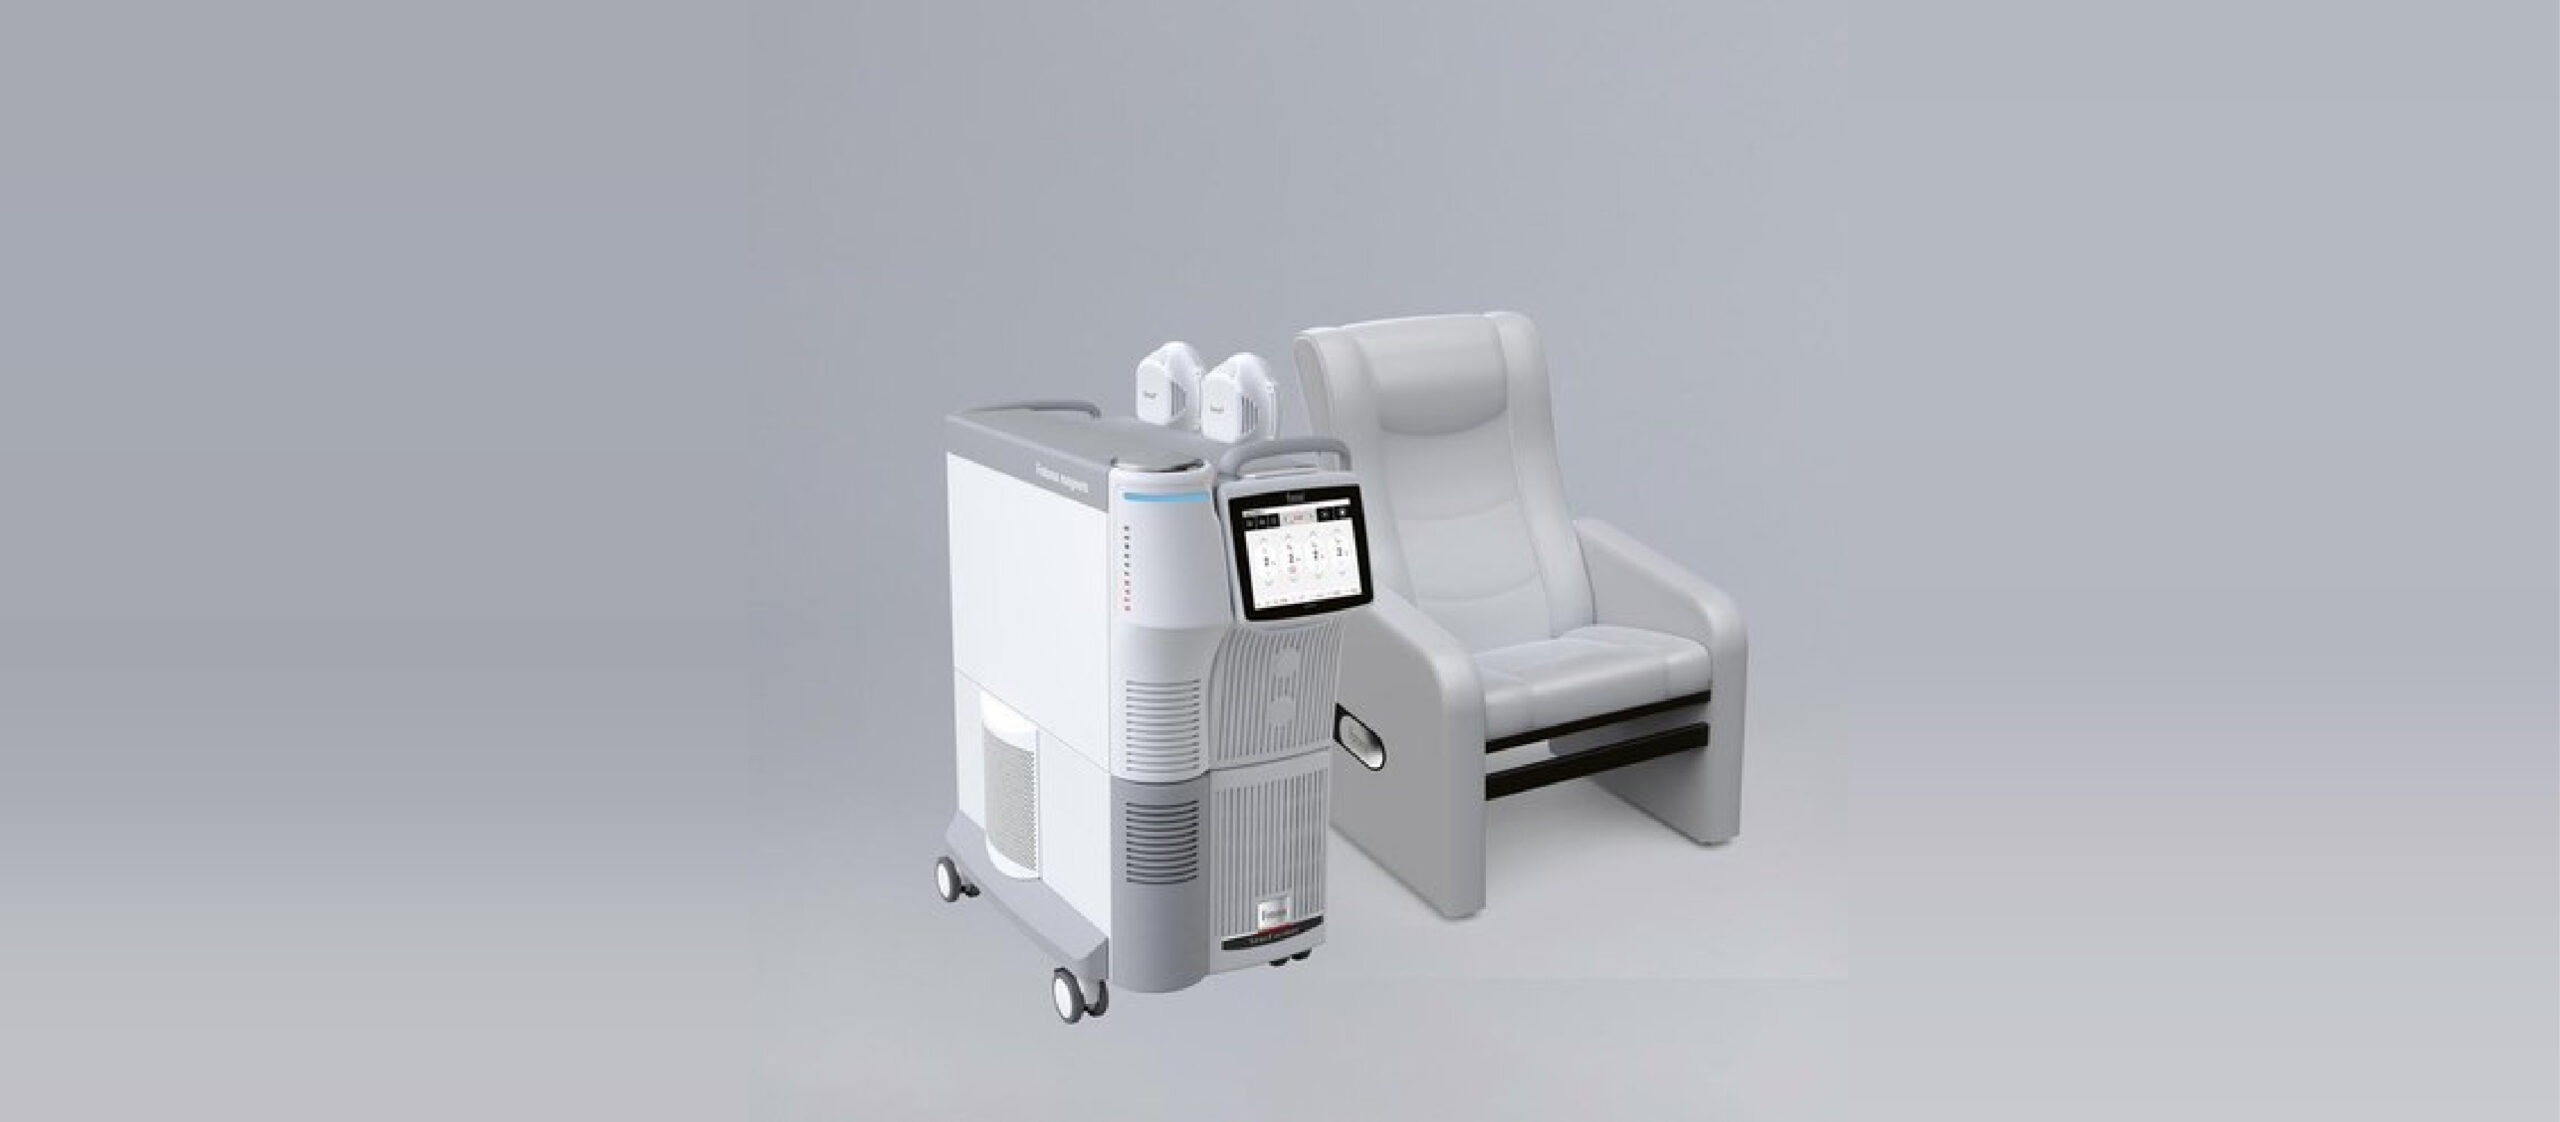 The StarFormer® IntimaWave® treatment uses non-invasive, HITS™ technology to selectively target muscle tissues and provide strengthening, toning and firming.